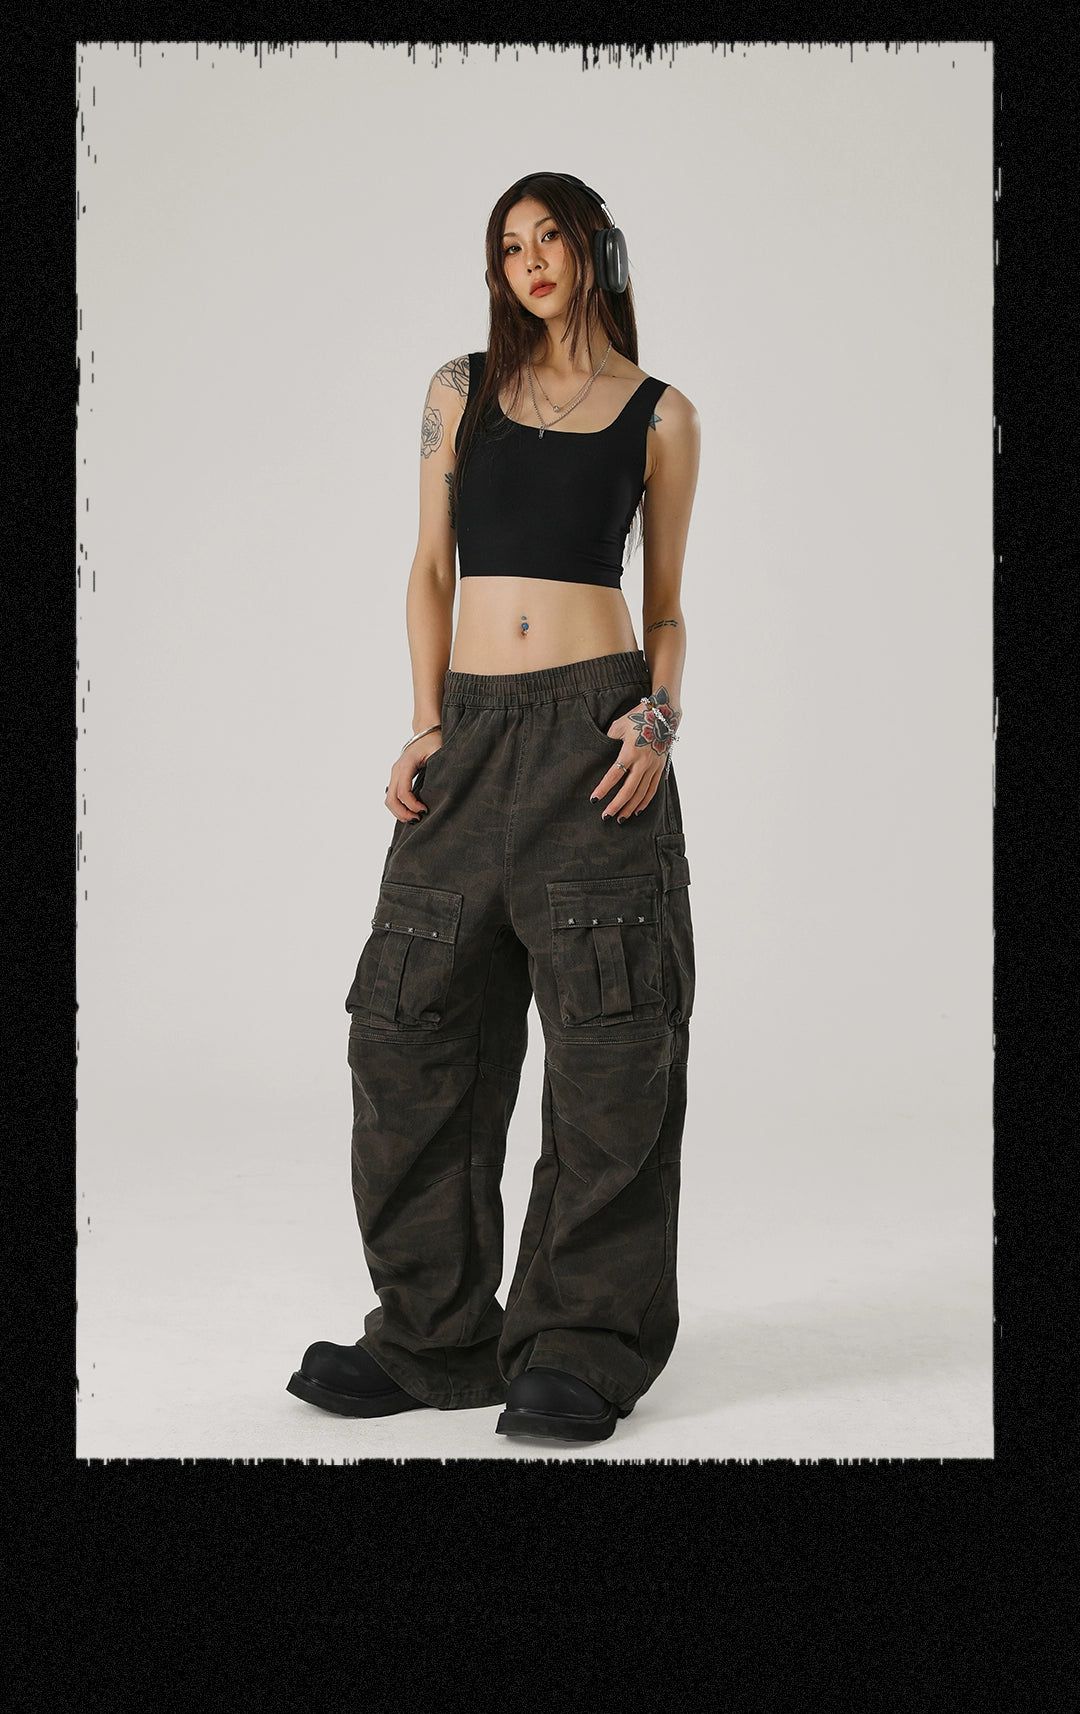 Gartered Camouflage Cargo Pants Korean Street Fashion Pants By JHYQ Shop Online at OH Vault